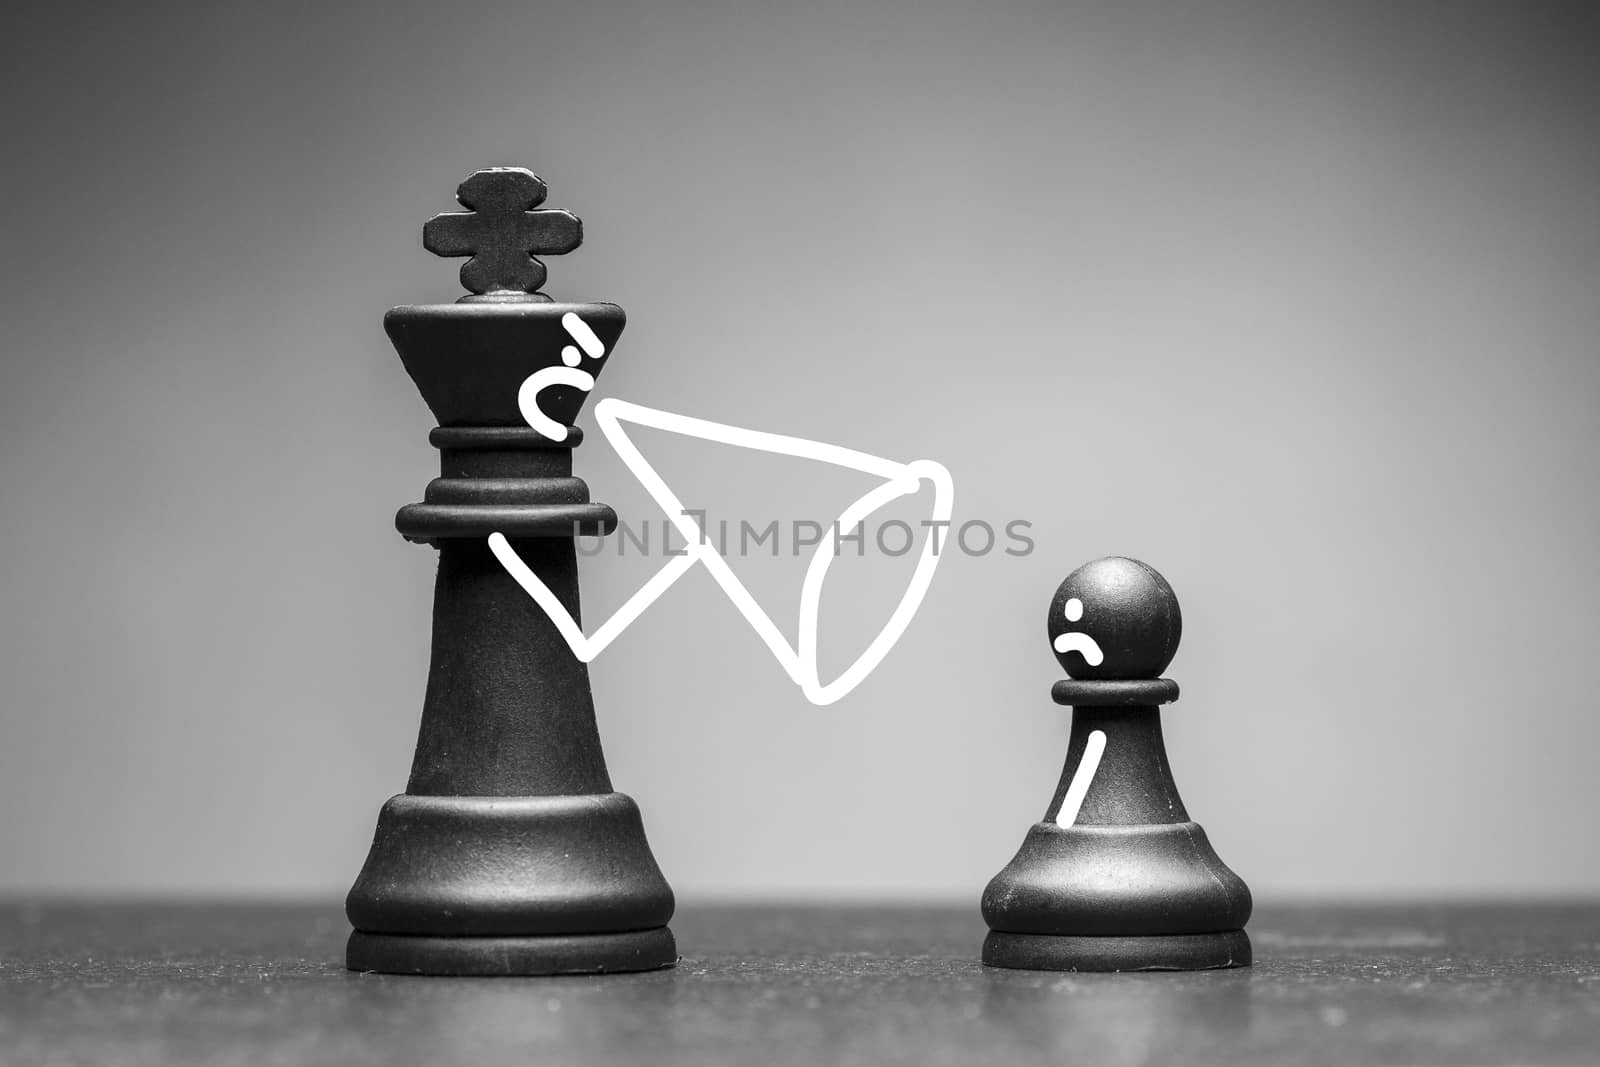 King chess piece using a megaphone yelling at a pawn with a dejected expression in a conceptual greyscale illustration